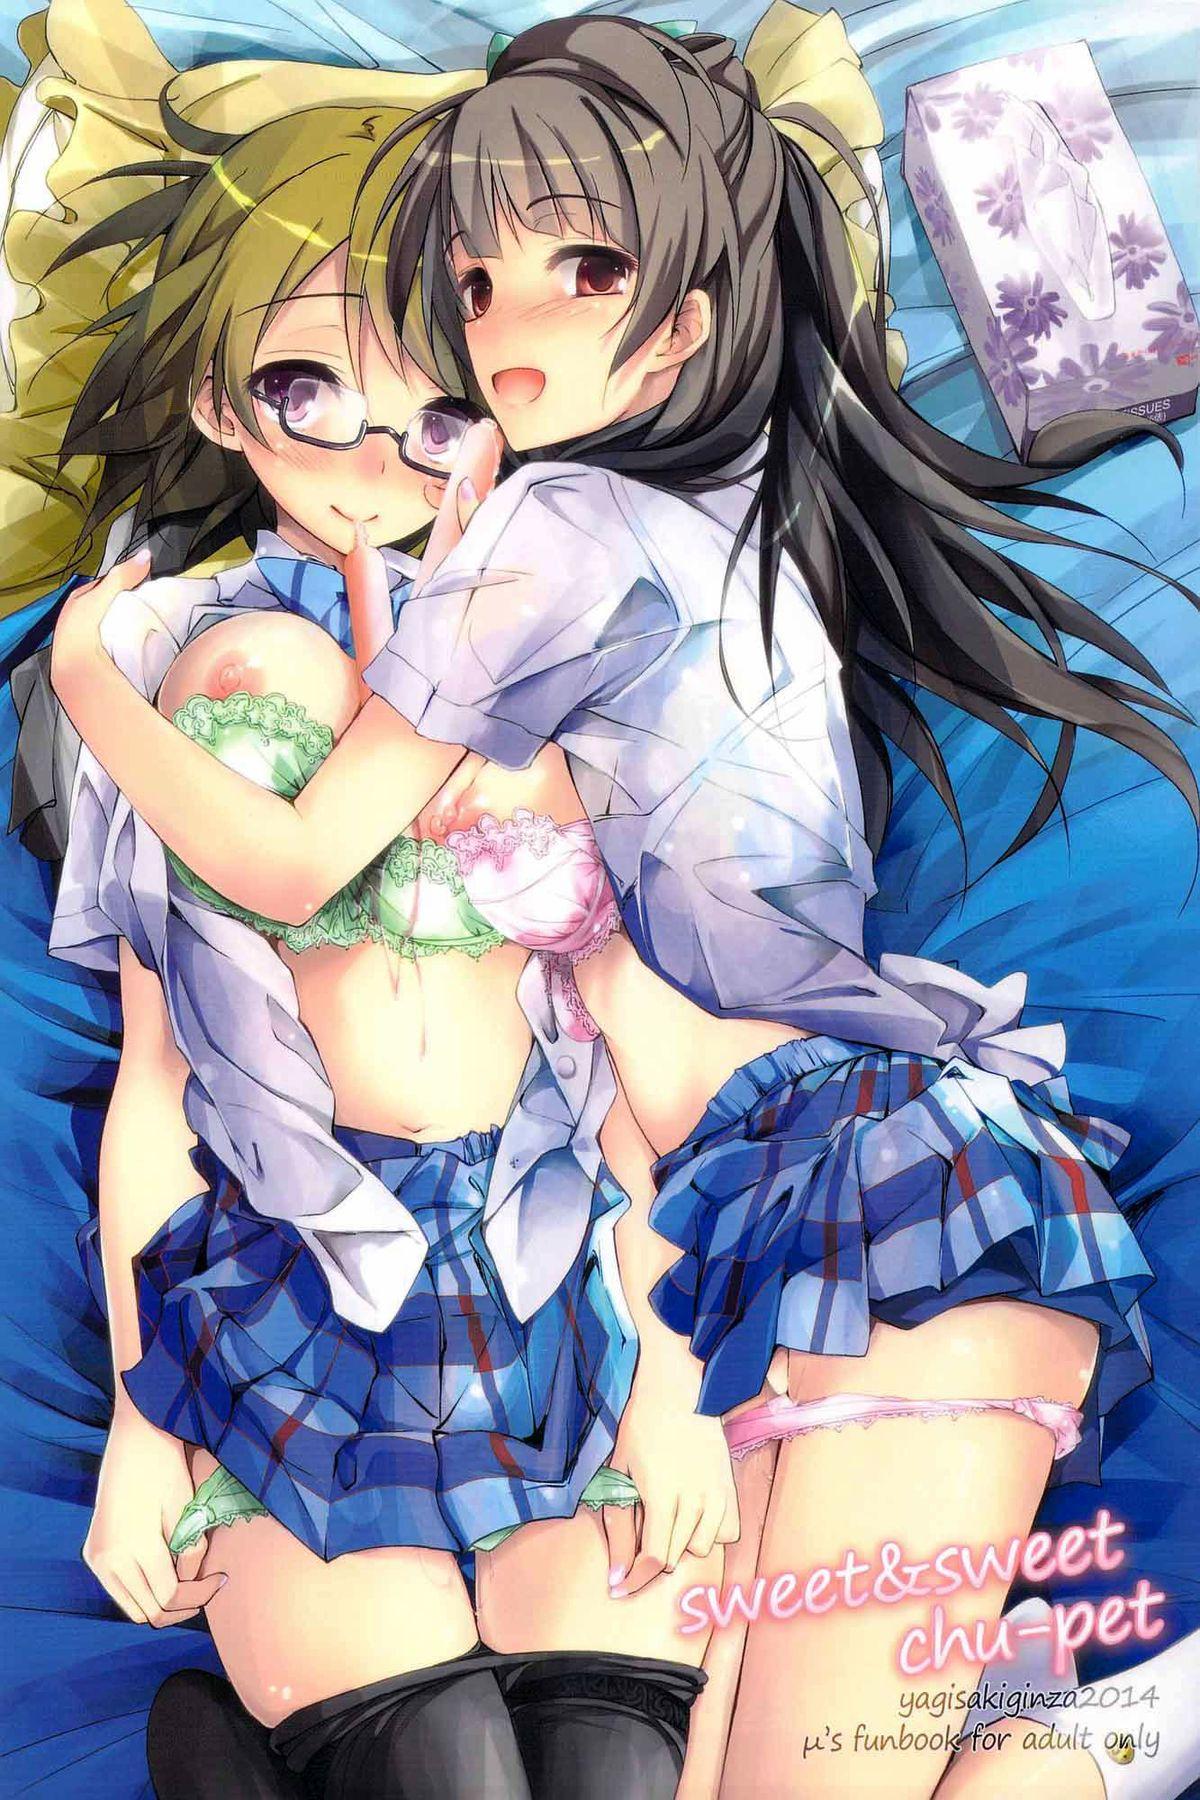 Brother Sister sweet&sweet chu-pet - Love live Fantasy - Page 1